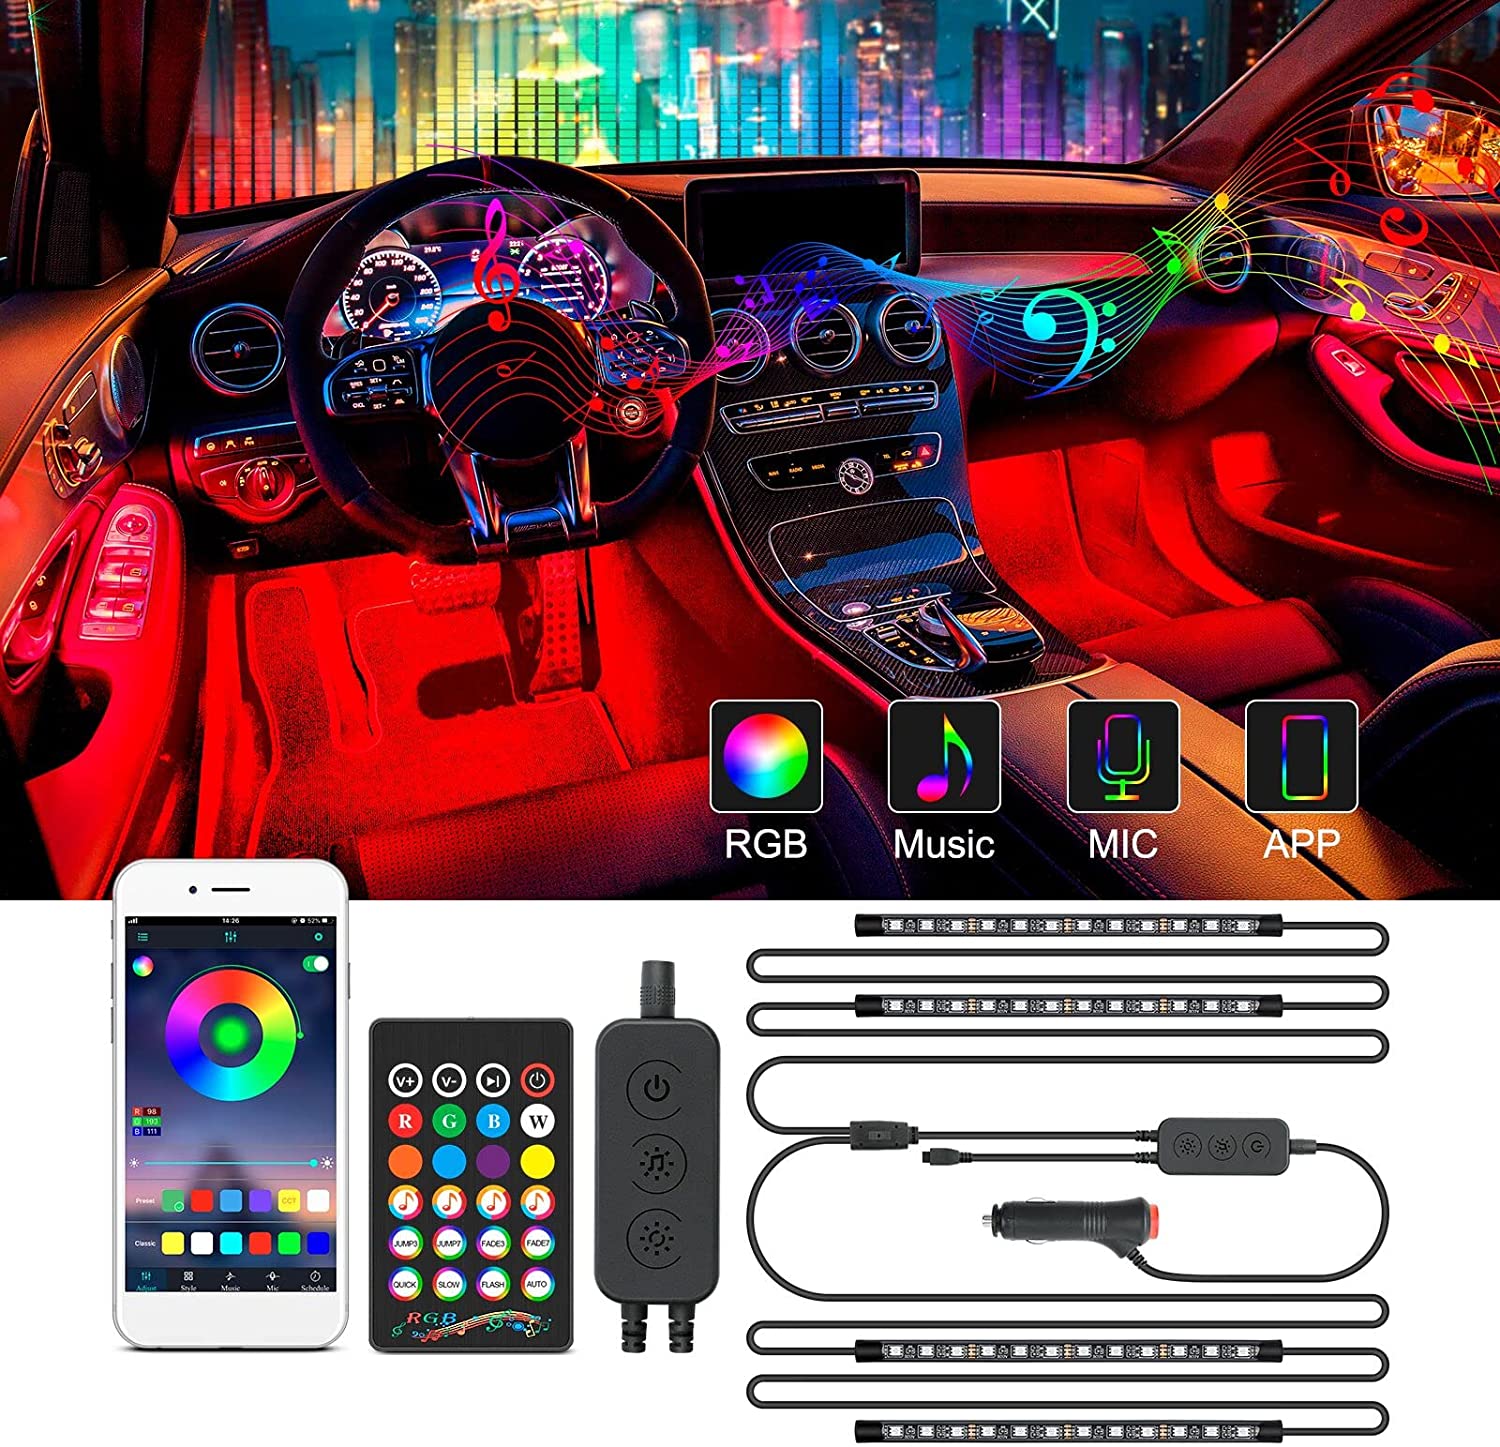 MICTUNING RGB Car Interior - 4pcs 48 LEDs Car LED Strip with Remote and Control Box, Music Sync Waterproof